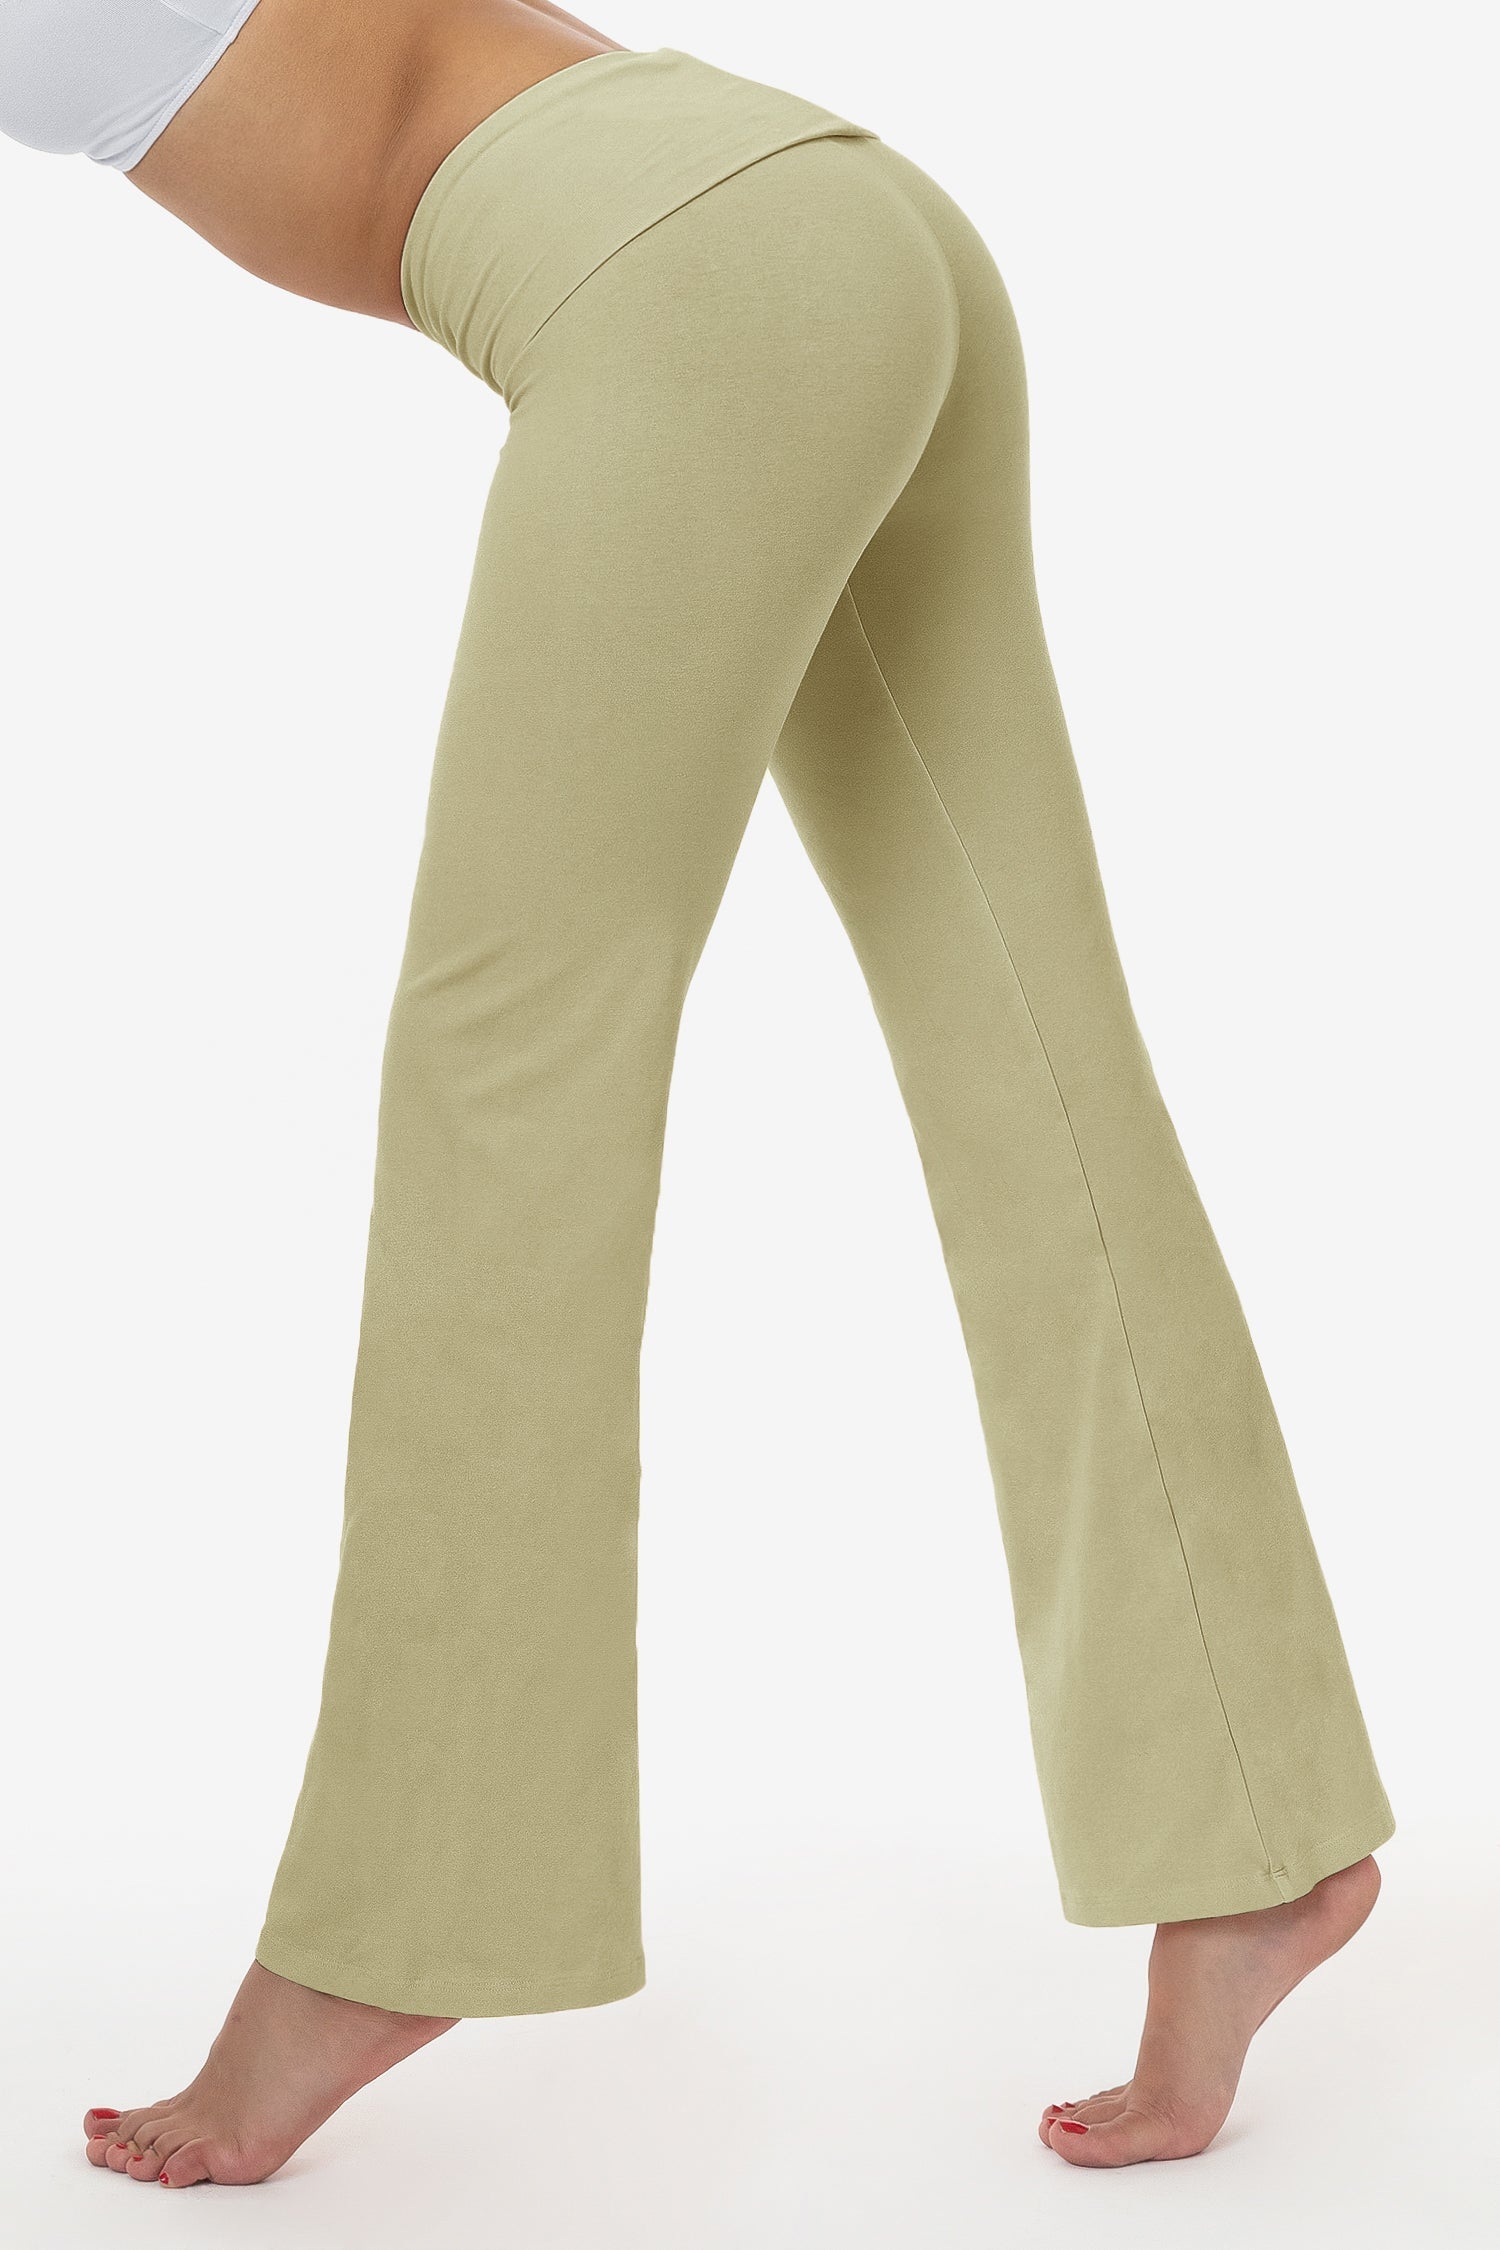 Harsh Camel Toe Yoga Pants! Products from my-store-7171738